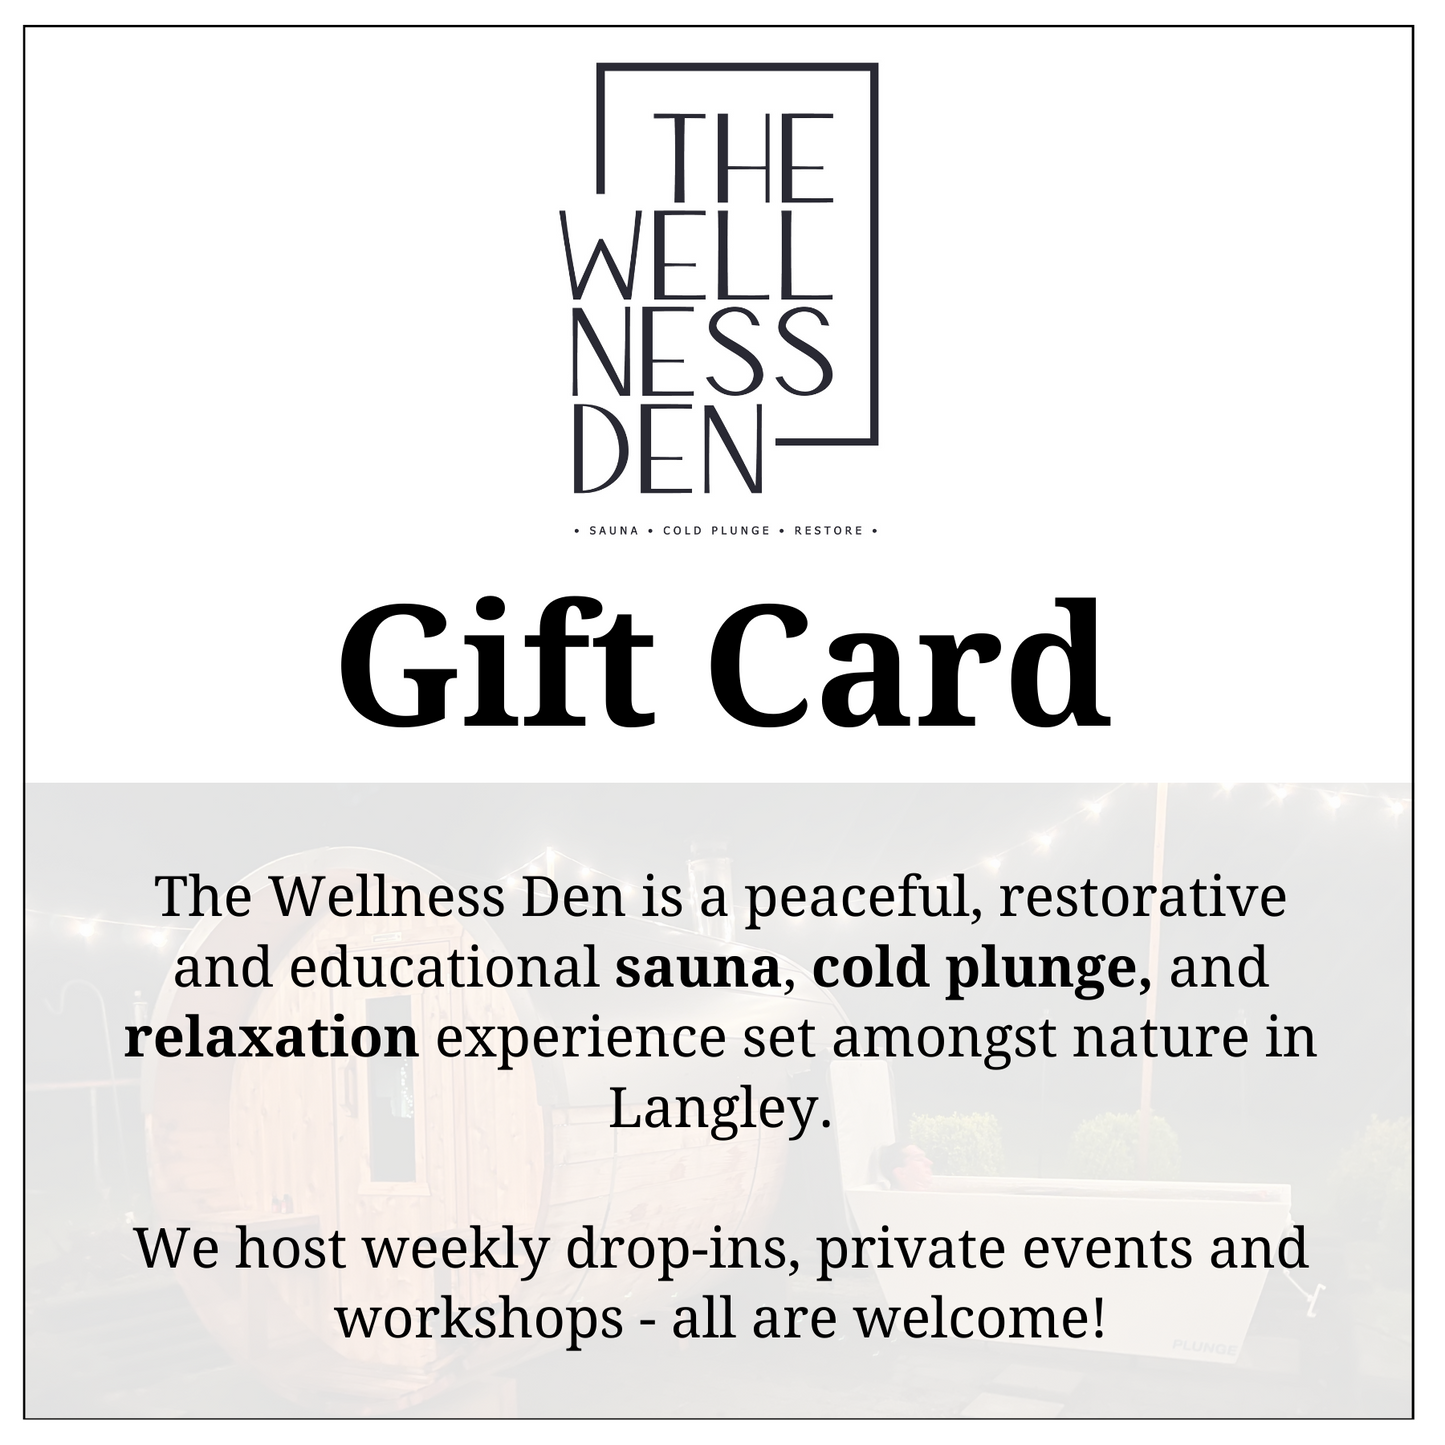 The Wellness Den Gift Card | Sauna, Cold Plunge, Restore in Langley, BC